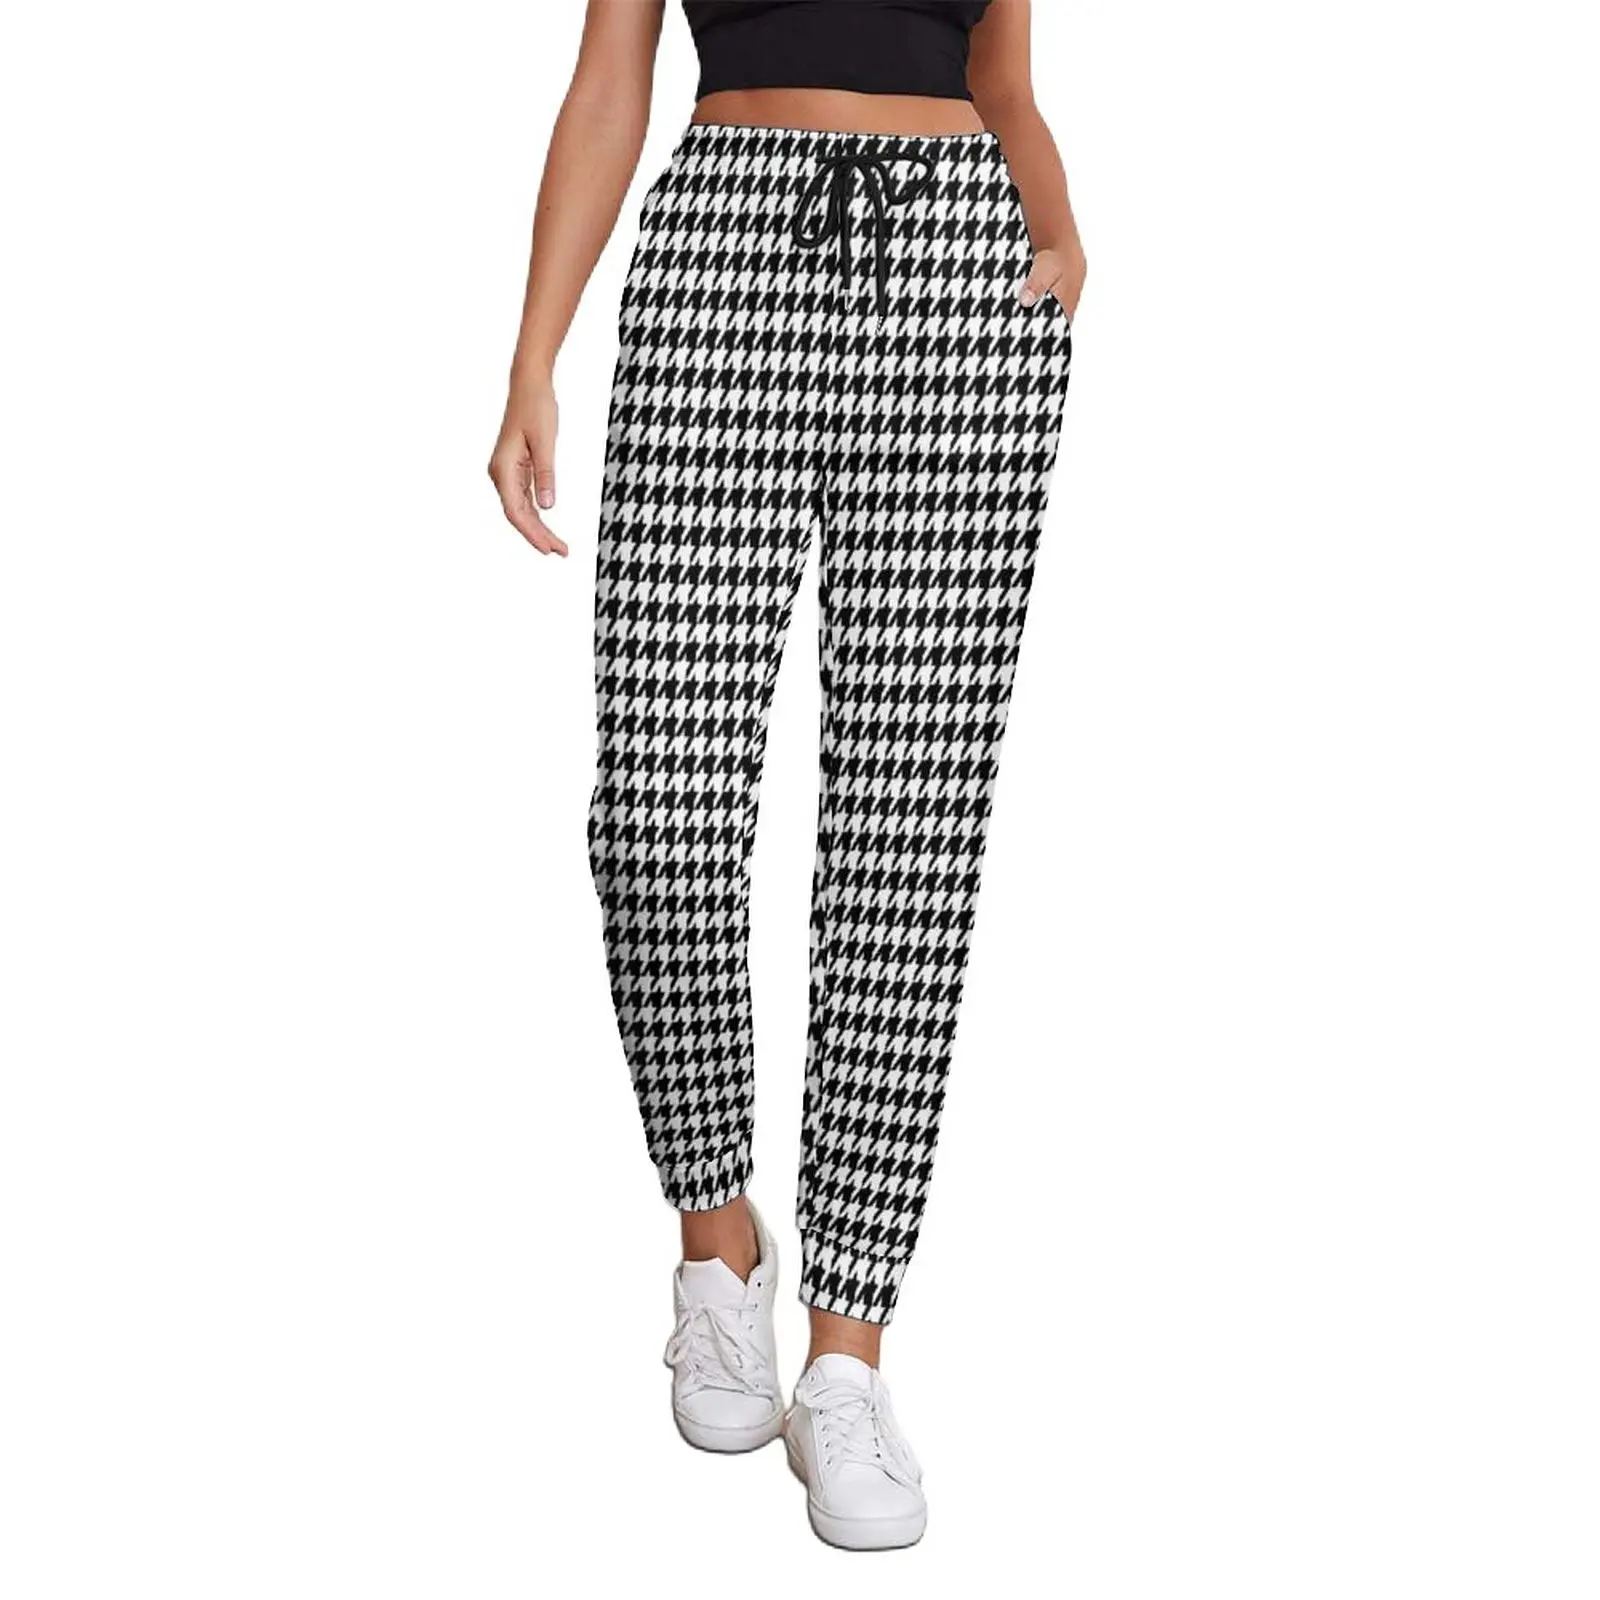 

Black White Houndstooth Jogger Pants Trendy Deco Chic Pattern Casual Big Size Sweatpants Autumn Women Printed Y2K Trousers